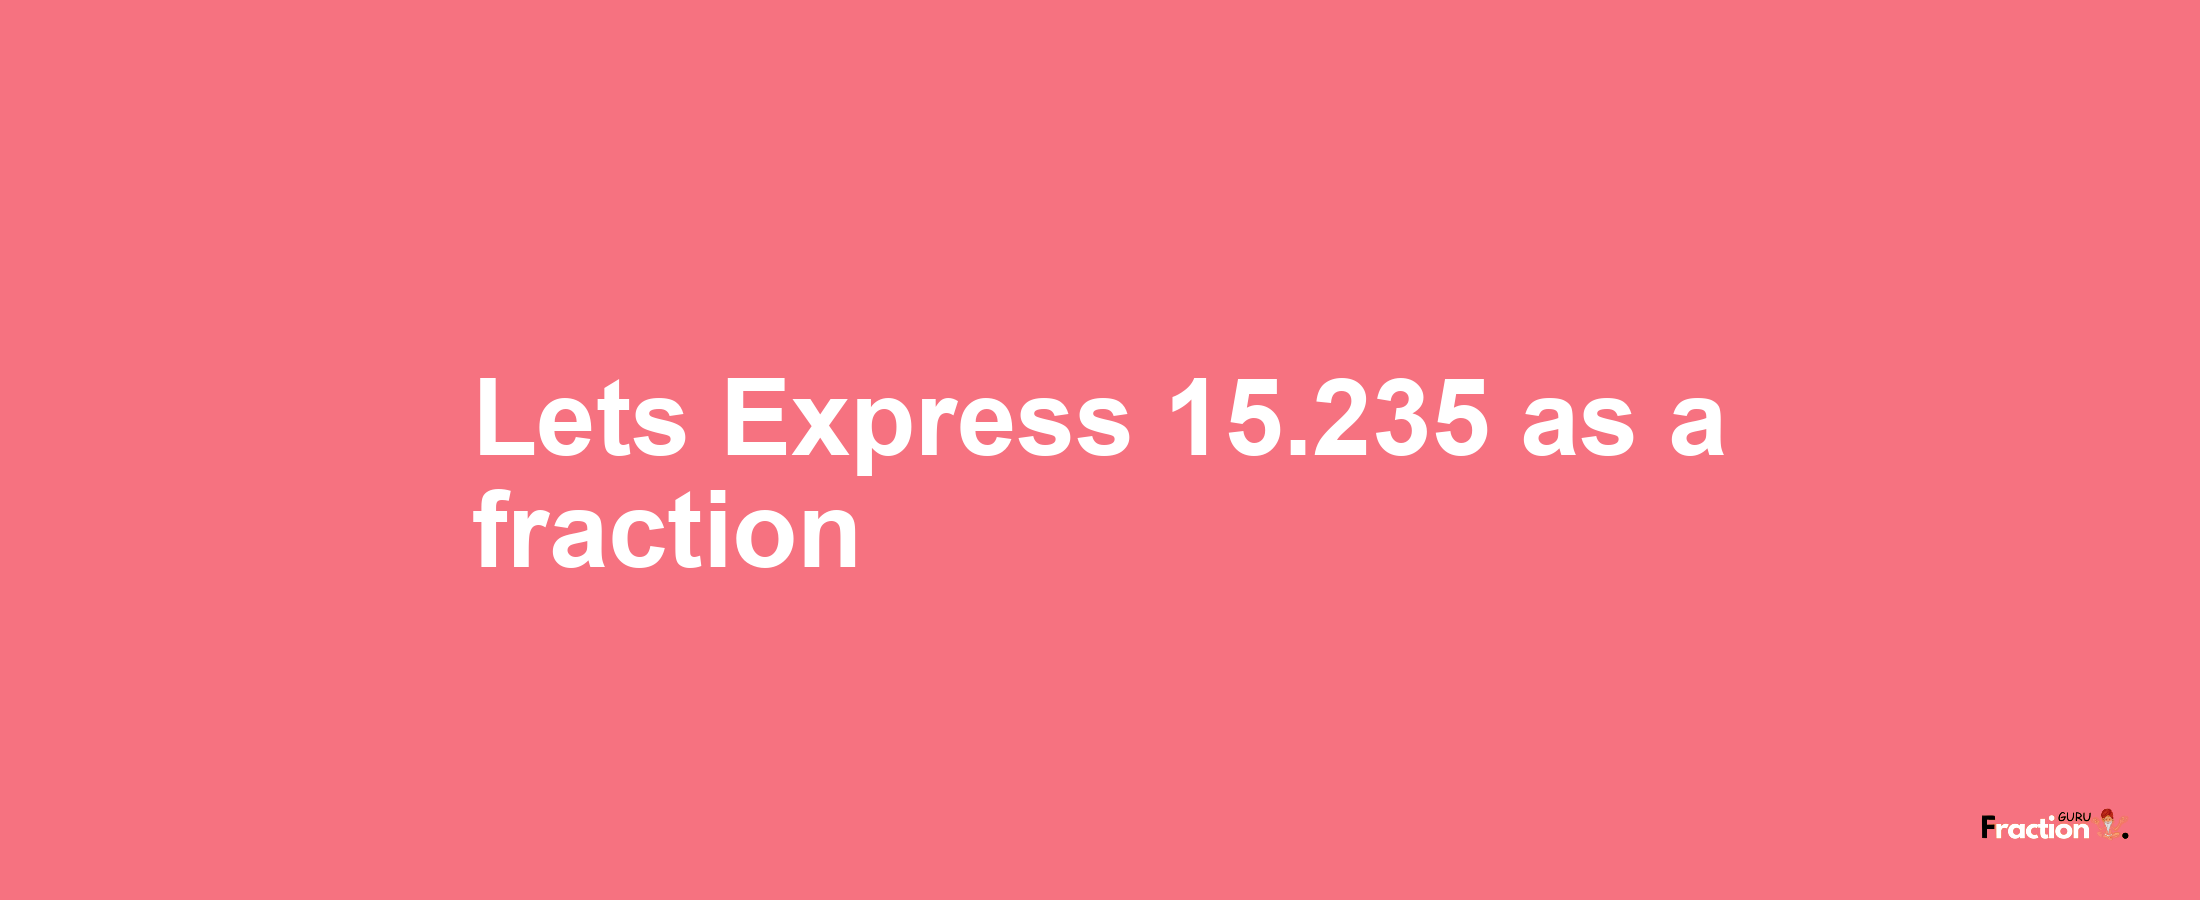 Lets Express 15.235 as afraction